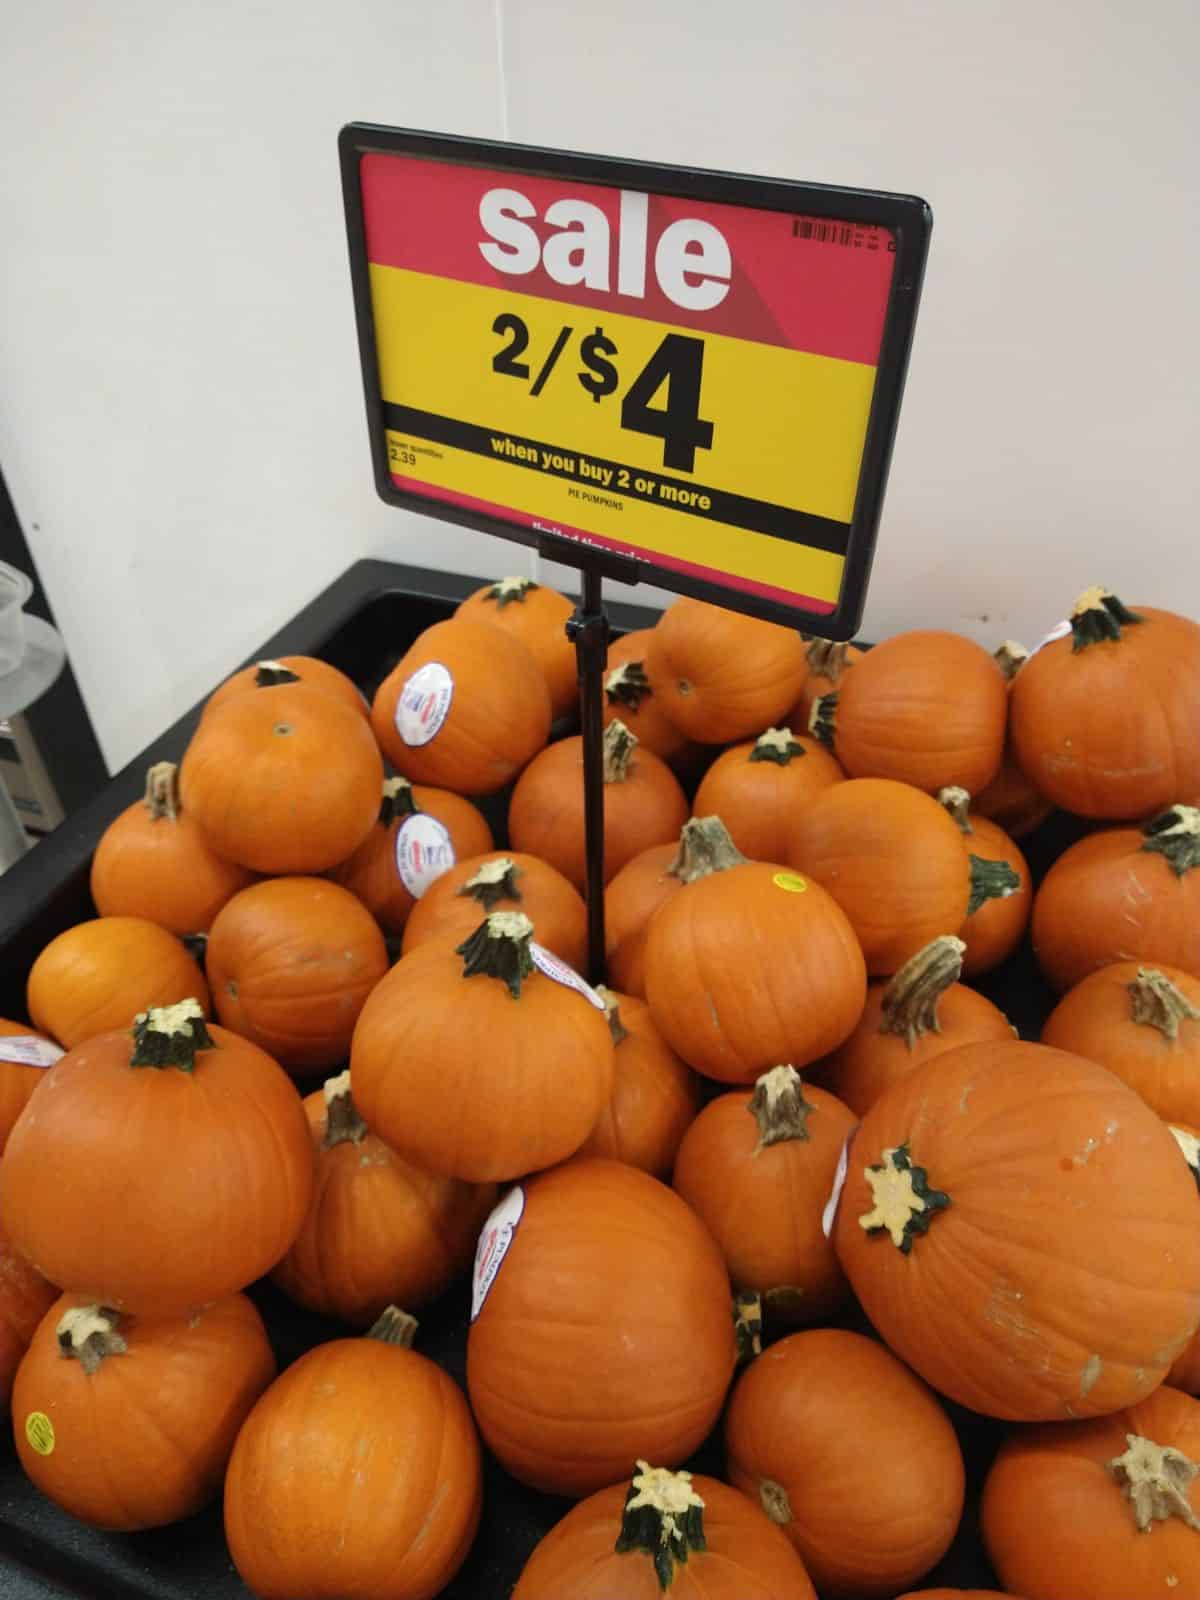 A display of pie pumpkins with a sale sign that says 2 for $4.